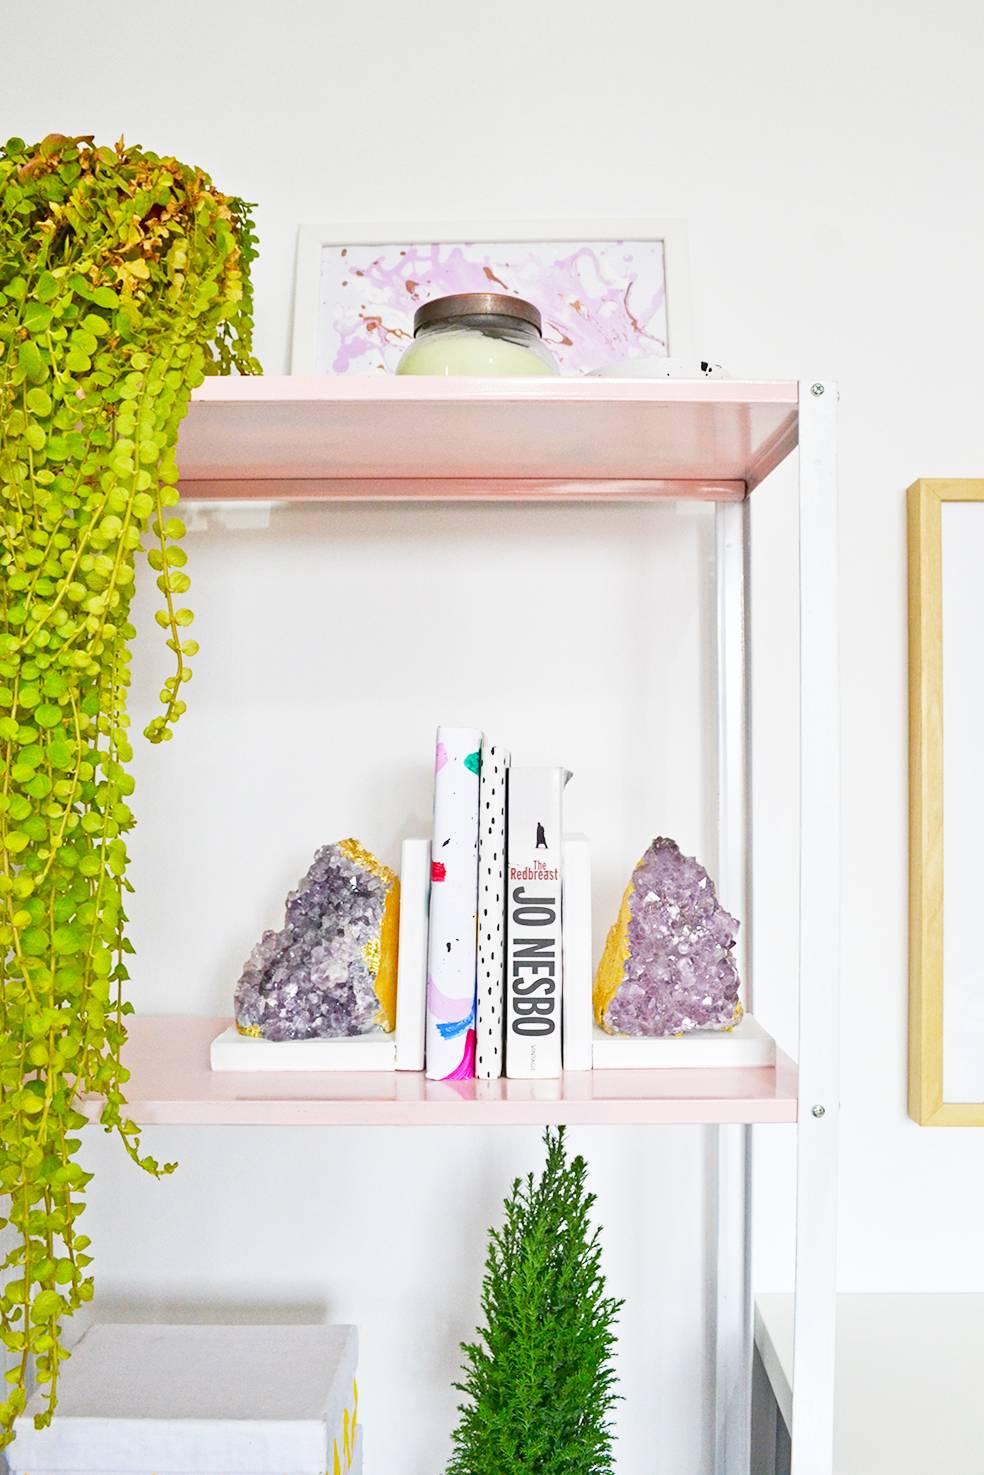 How To: Make Amethyst Bookends under $60